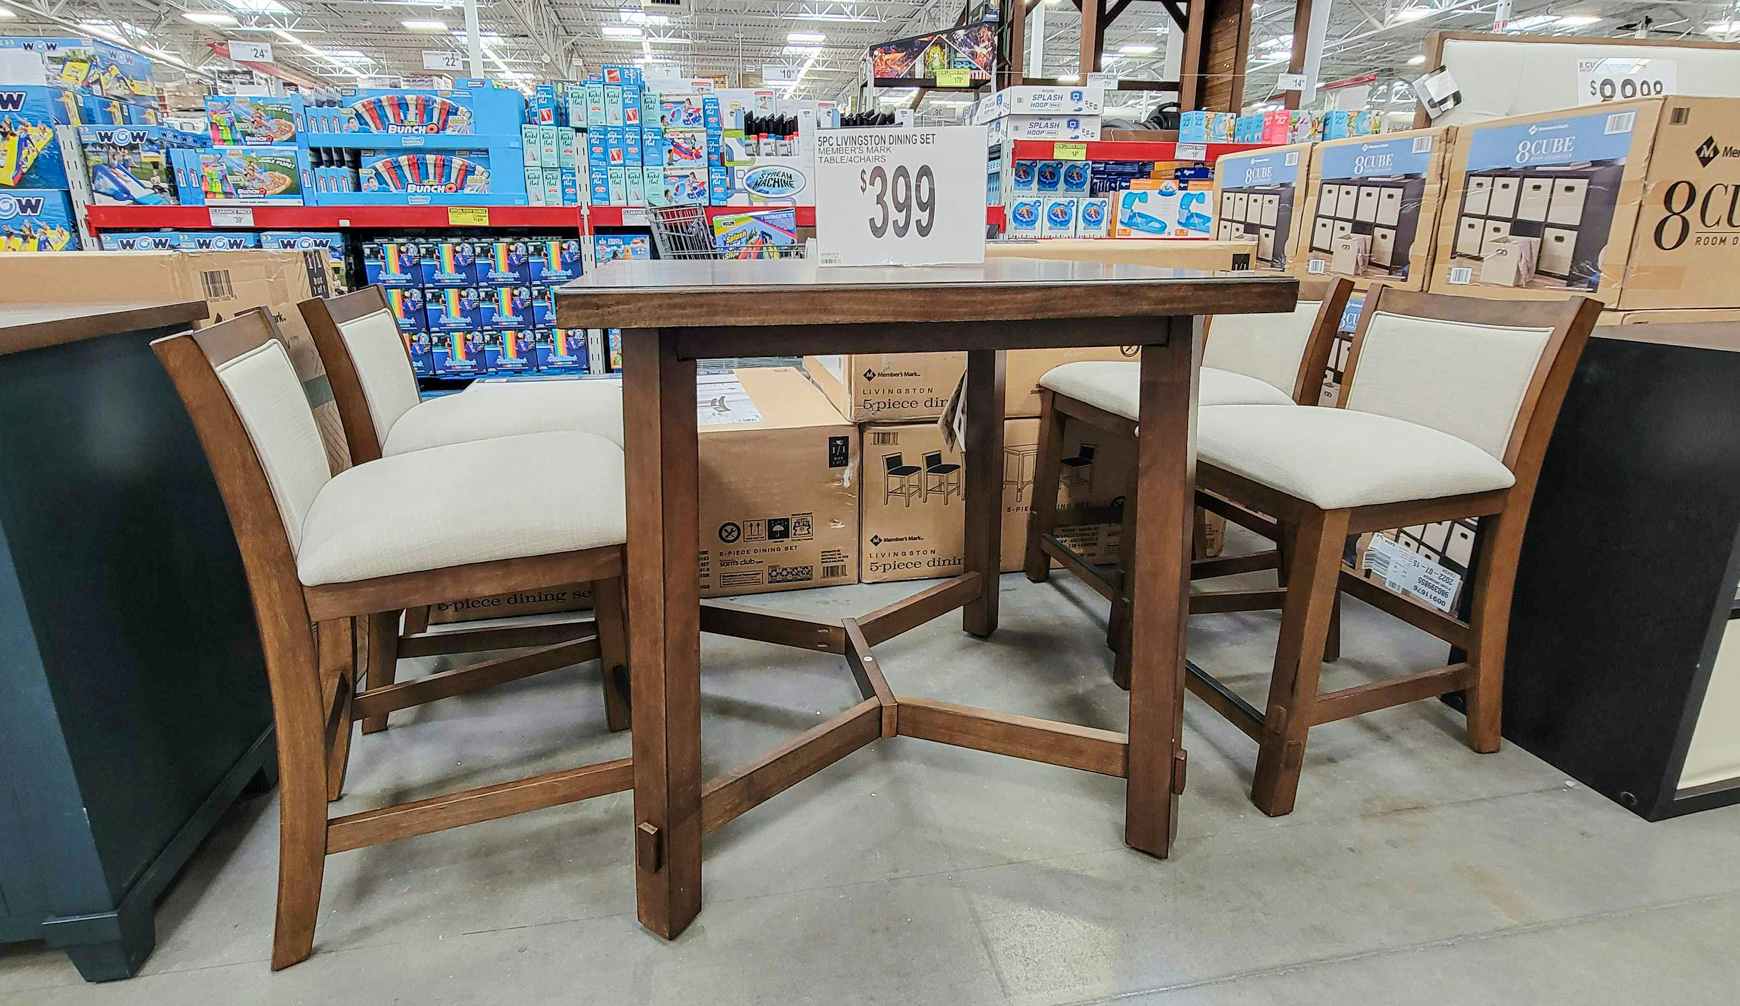 a 5 piece dining set displayed, includes a table and 4 padded chairs